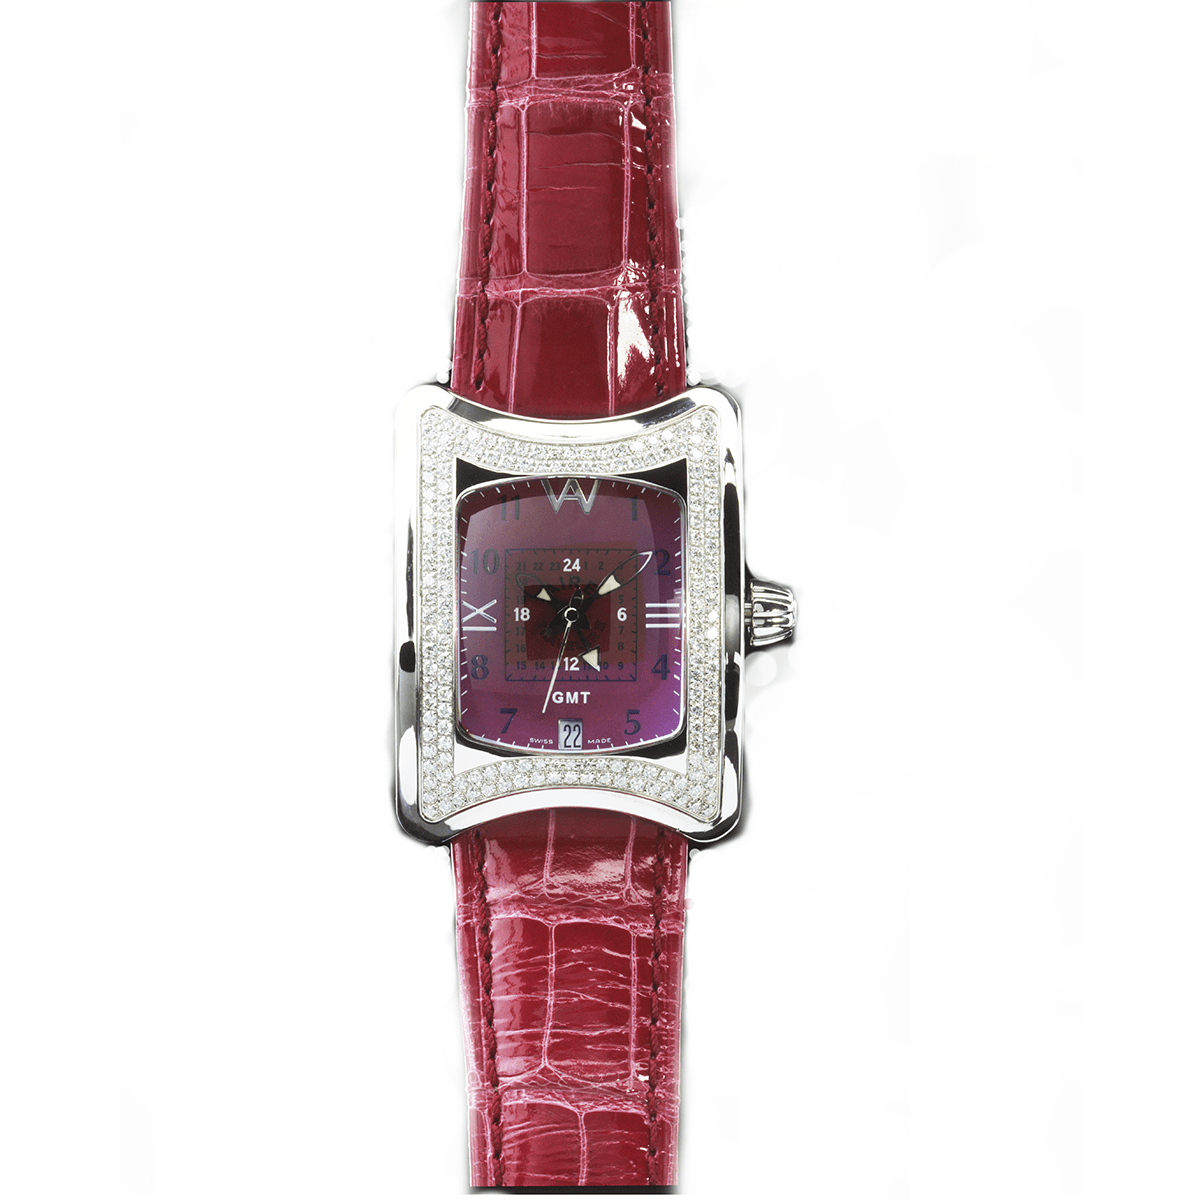 Watch - Aire Traveler II GMT Swiss Made Automatic Unique Diamond Watch For Men And Women